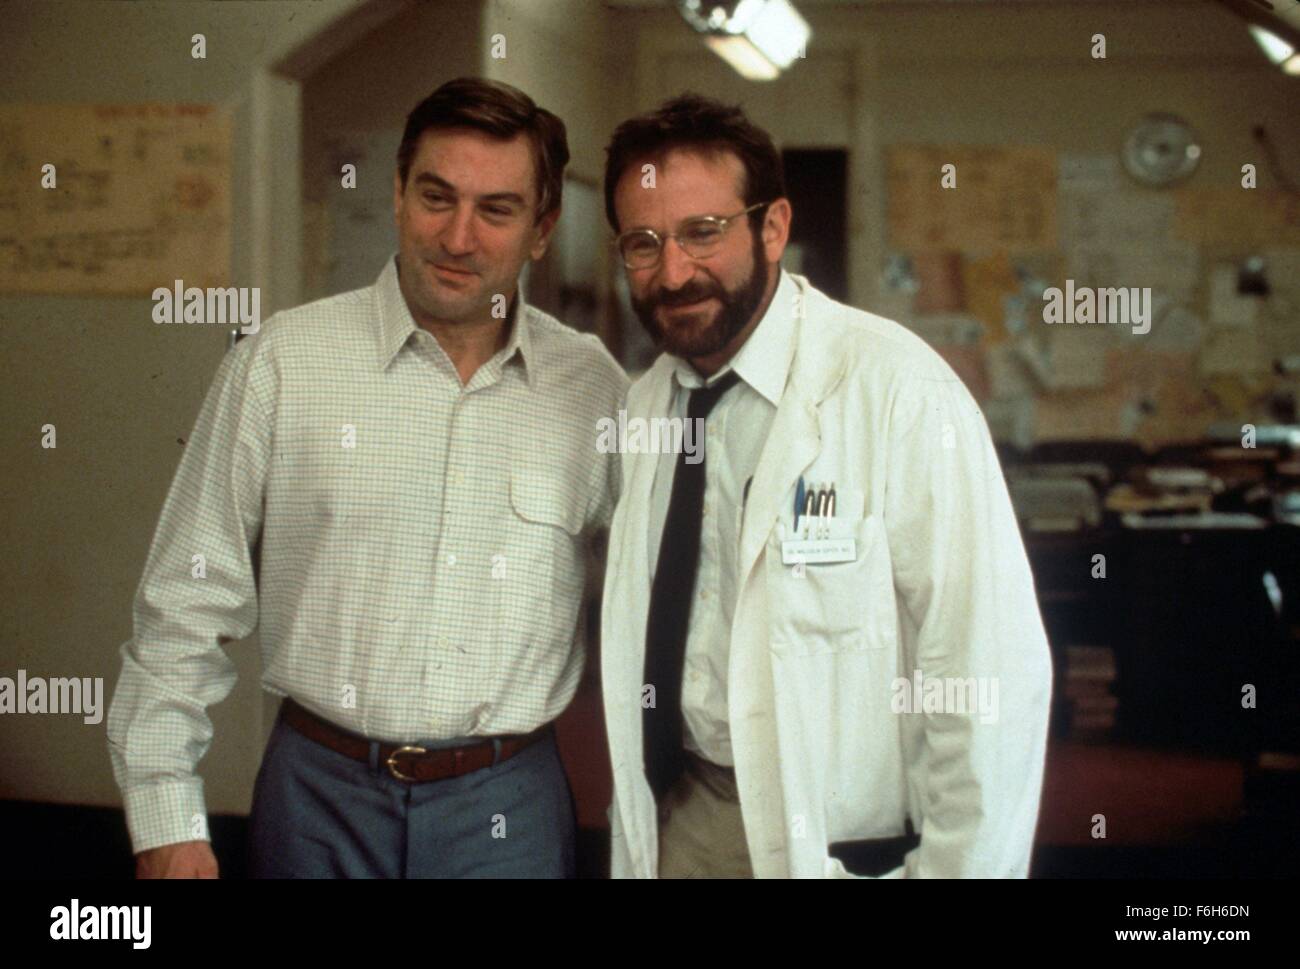 RELEASE DATE: December 20, 1990  MOVIE TITLE: Awakenings  STUDIO: Columbia Pictures Corporation  DIRECTOR: Penny Marshall  PLOT: A new doctor finds himself with a ward full of comatose patients. He is disturbed by them and the fact that they have been comatose for decades with no hope of any cure. When he finds a possible chemical cure he gets permission to try it on one of them. When the first patient awakes, he is now an adult having gone into a coma in his early teens. The film then delights in the new awareness of the patients and then on the reactions of their relatives to the changes in Stock Photo